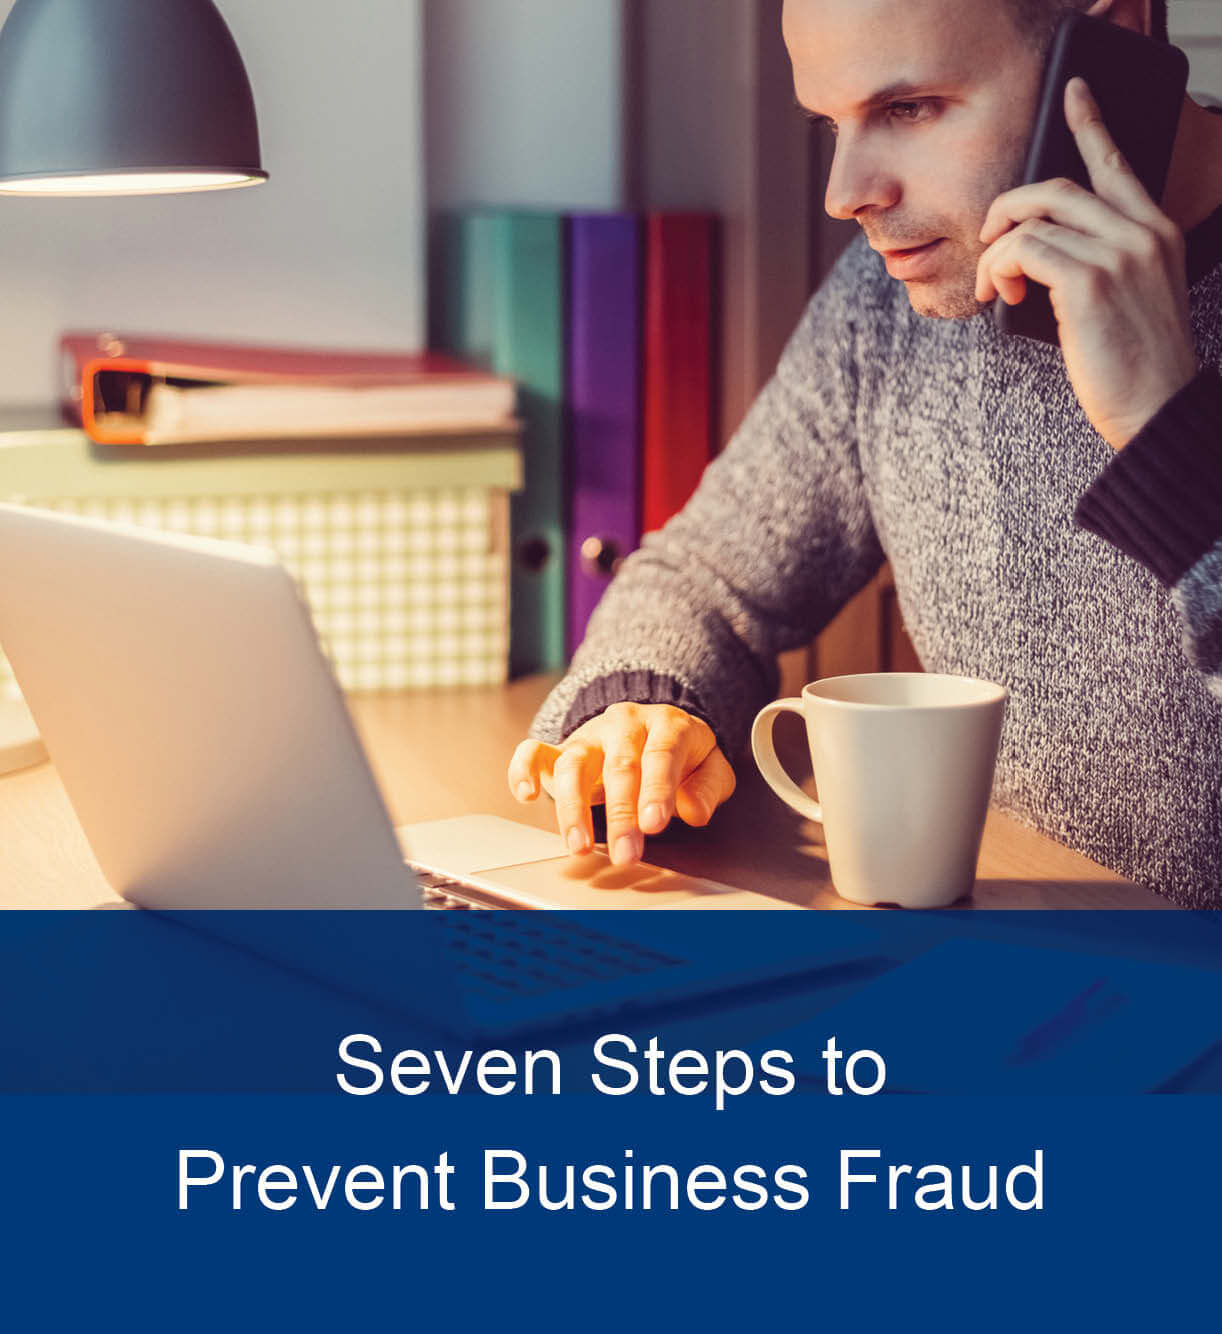 Seven Steps to Prevent Business Fraud